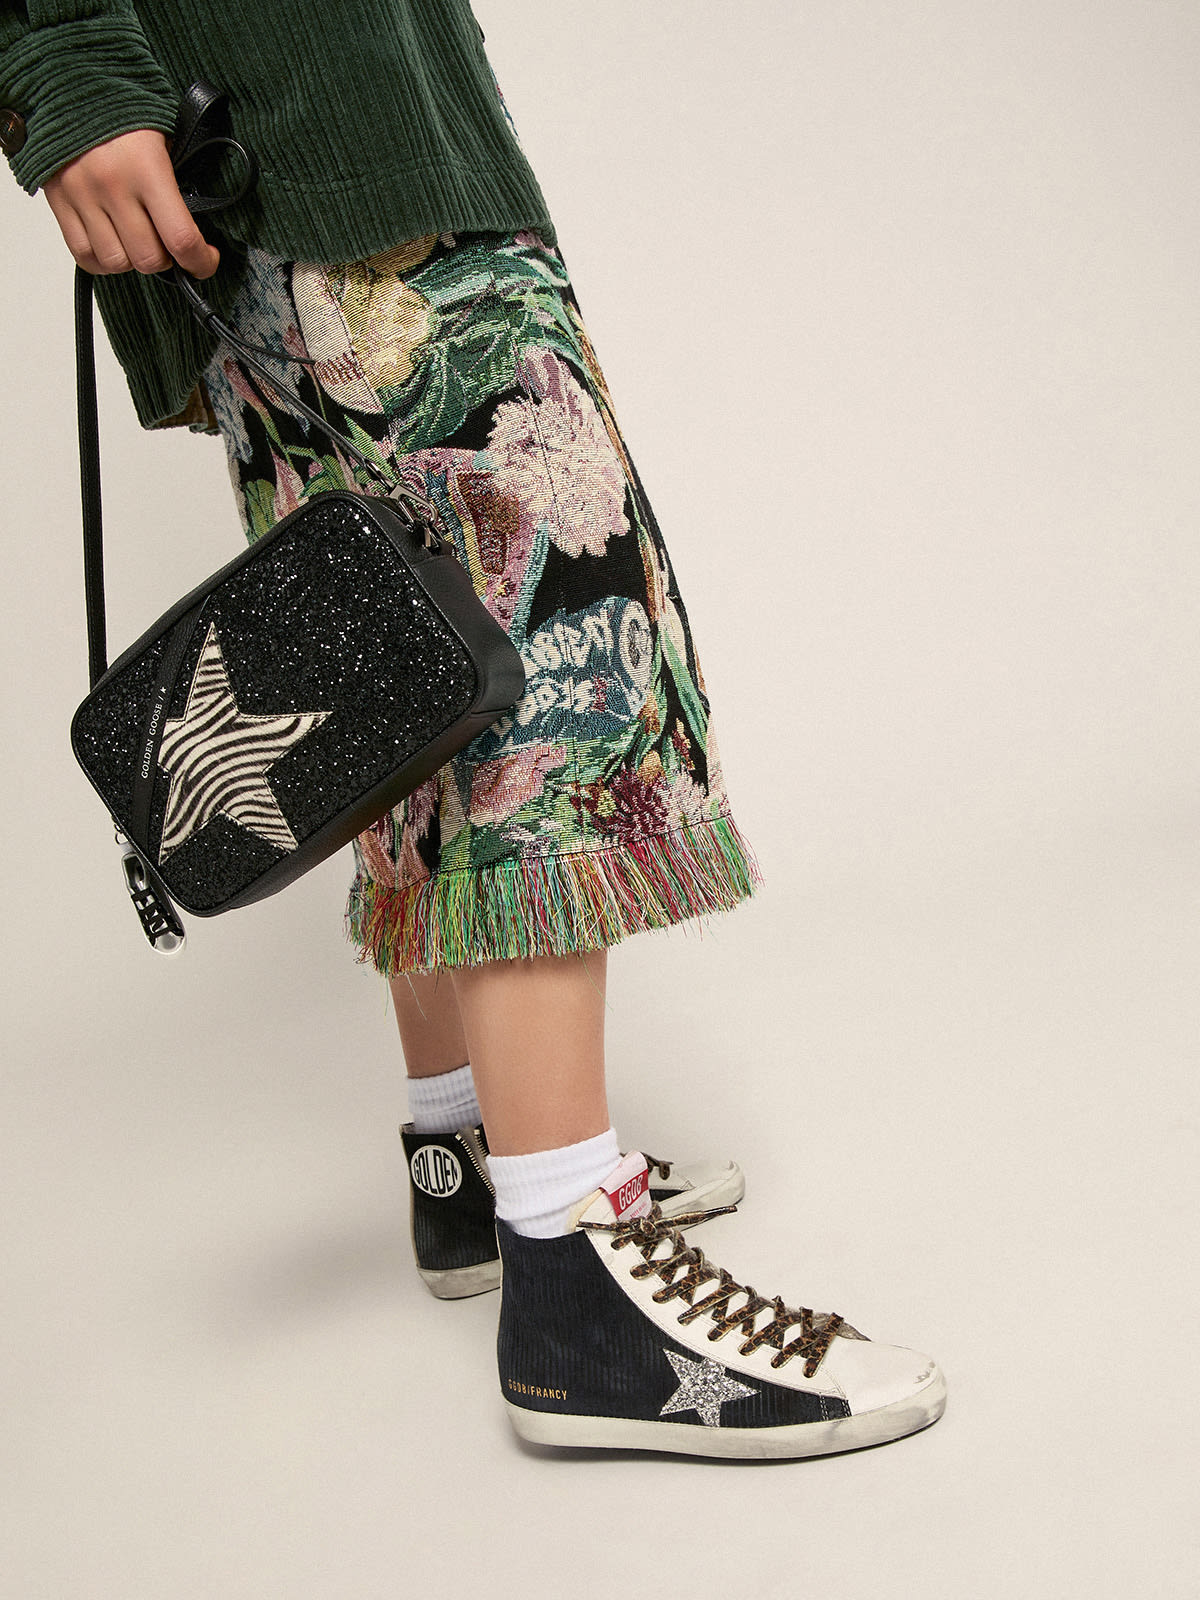 Francy sneakers in black suede with corduroy print and shearling lining |  Golden Goose